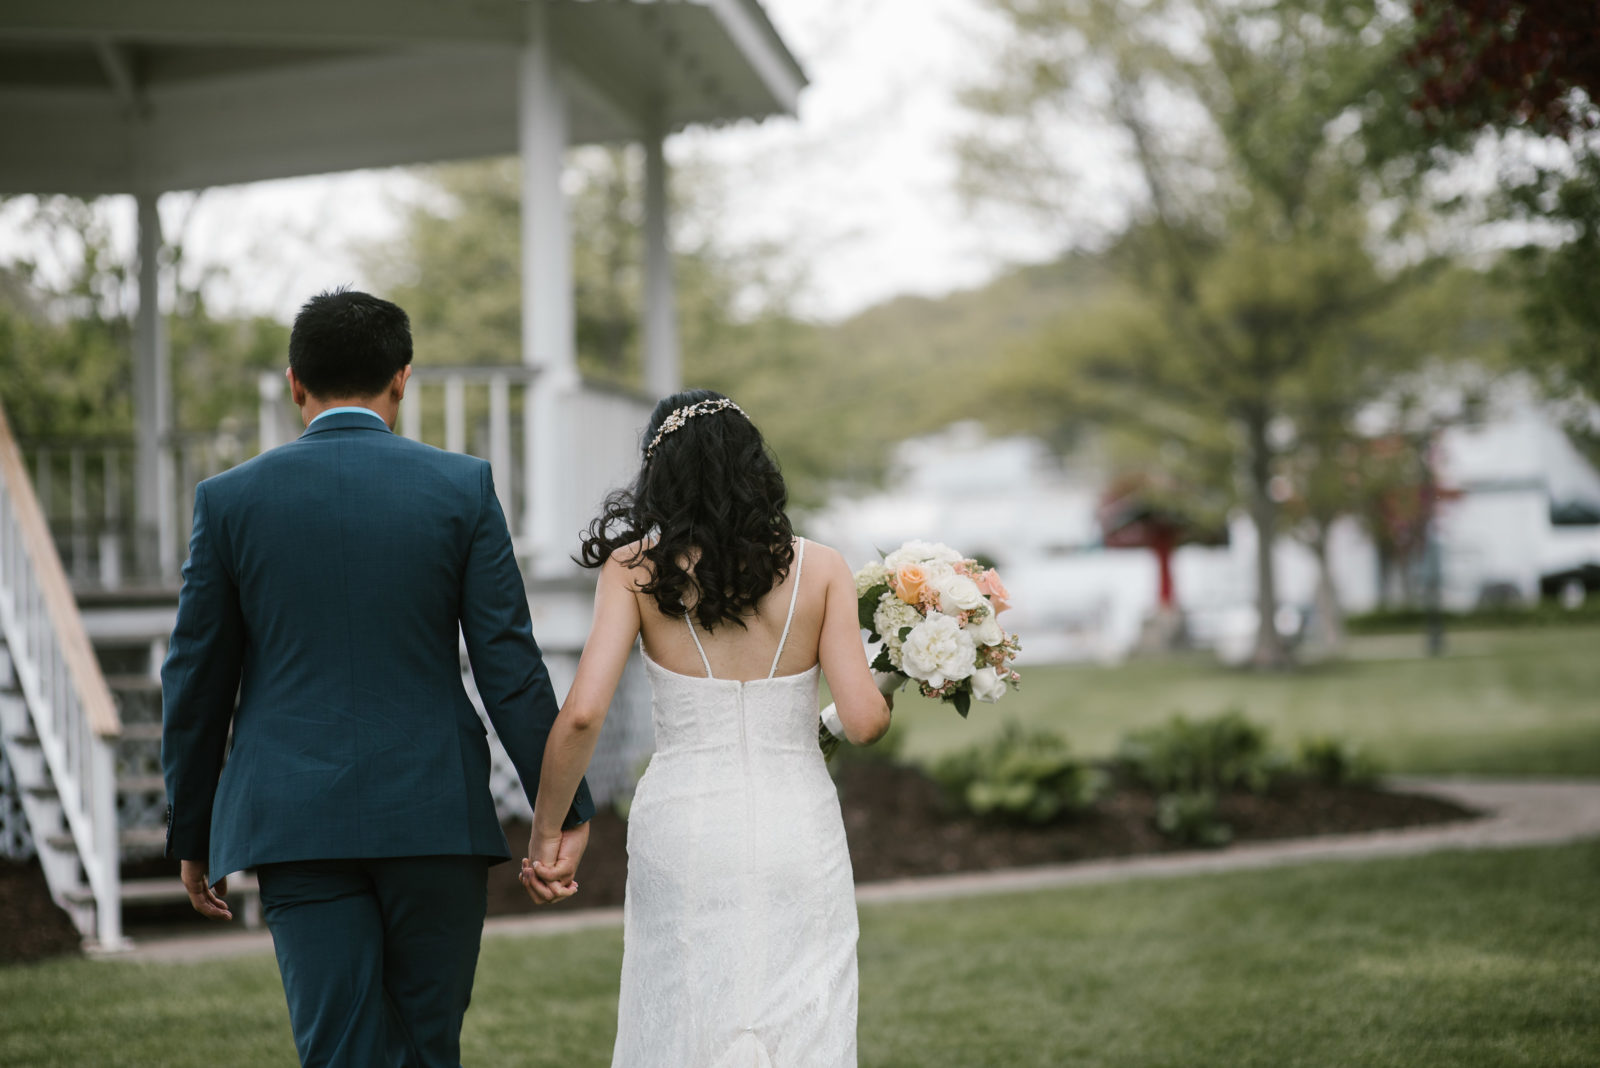 eloping in michigan with our package get hitched quick eloping in saugatuck, wedding packages, simple wedding in wicks park planned our saugatuck wedding planner